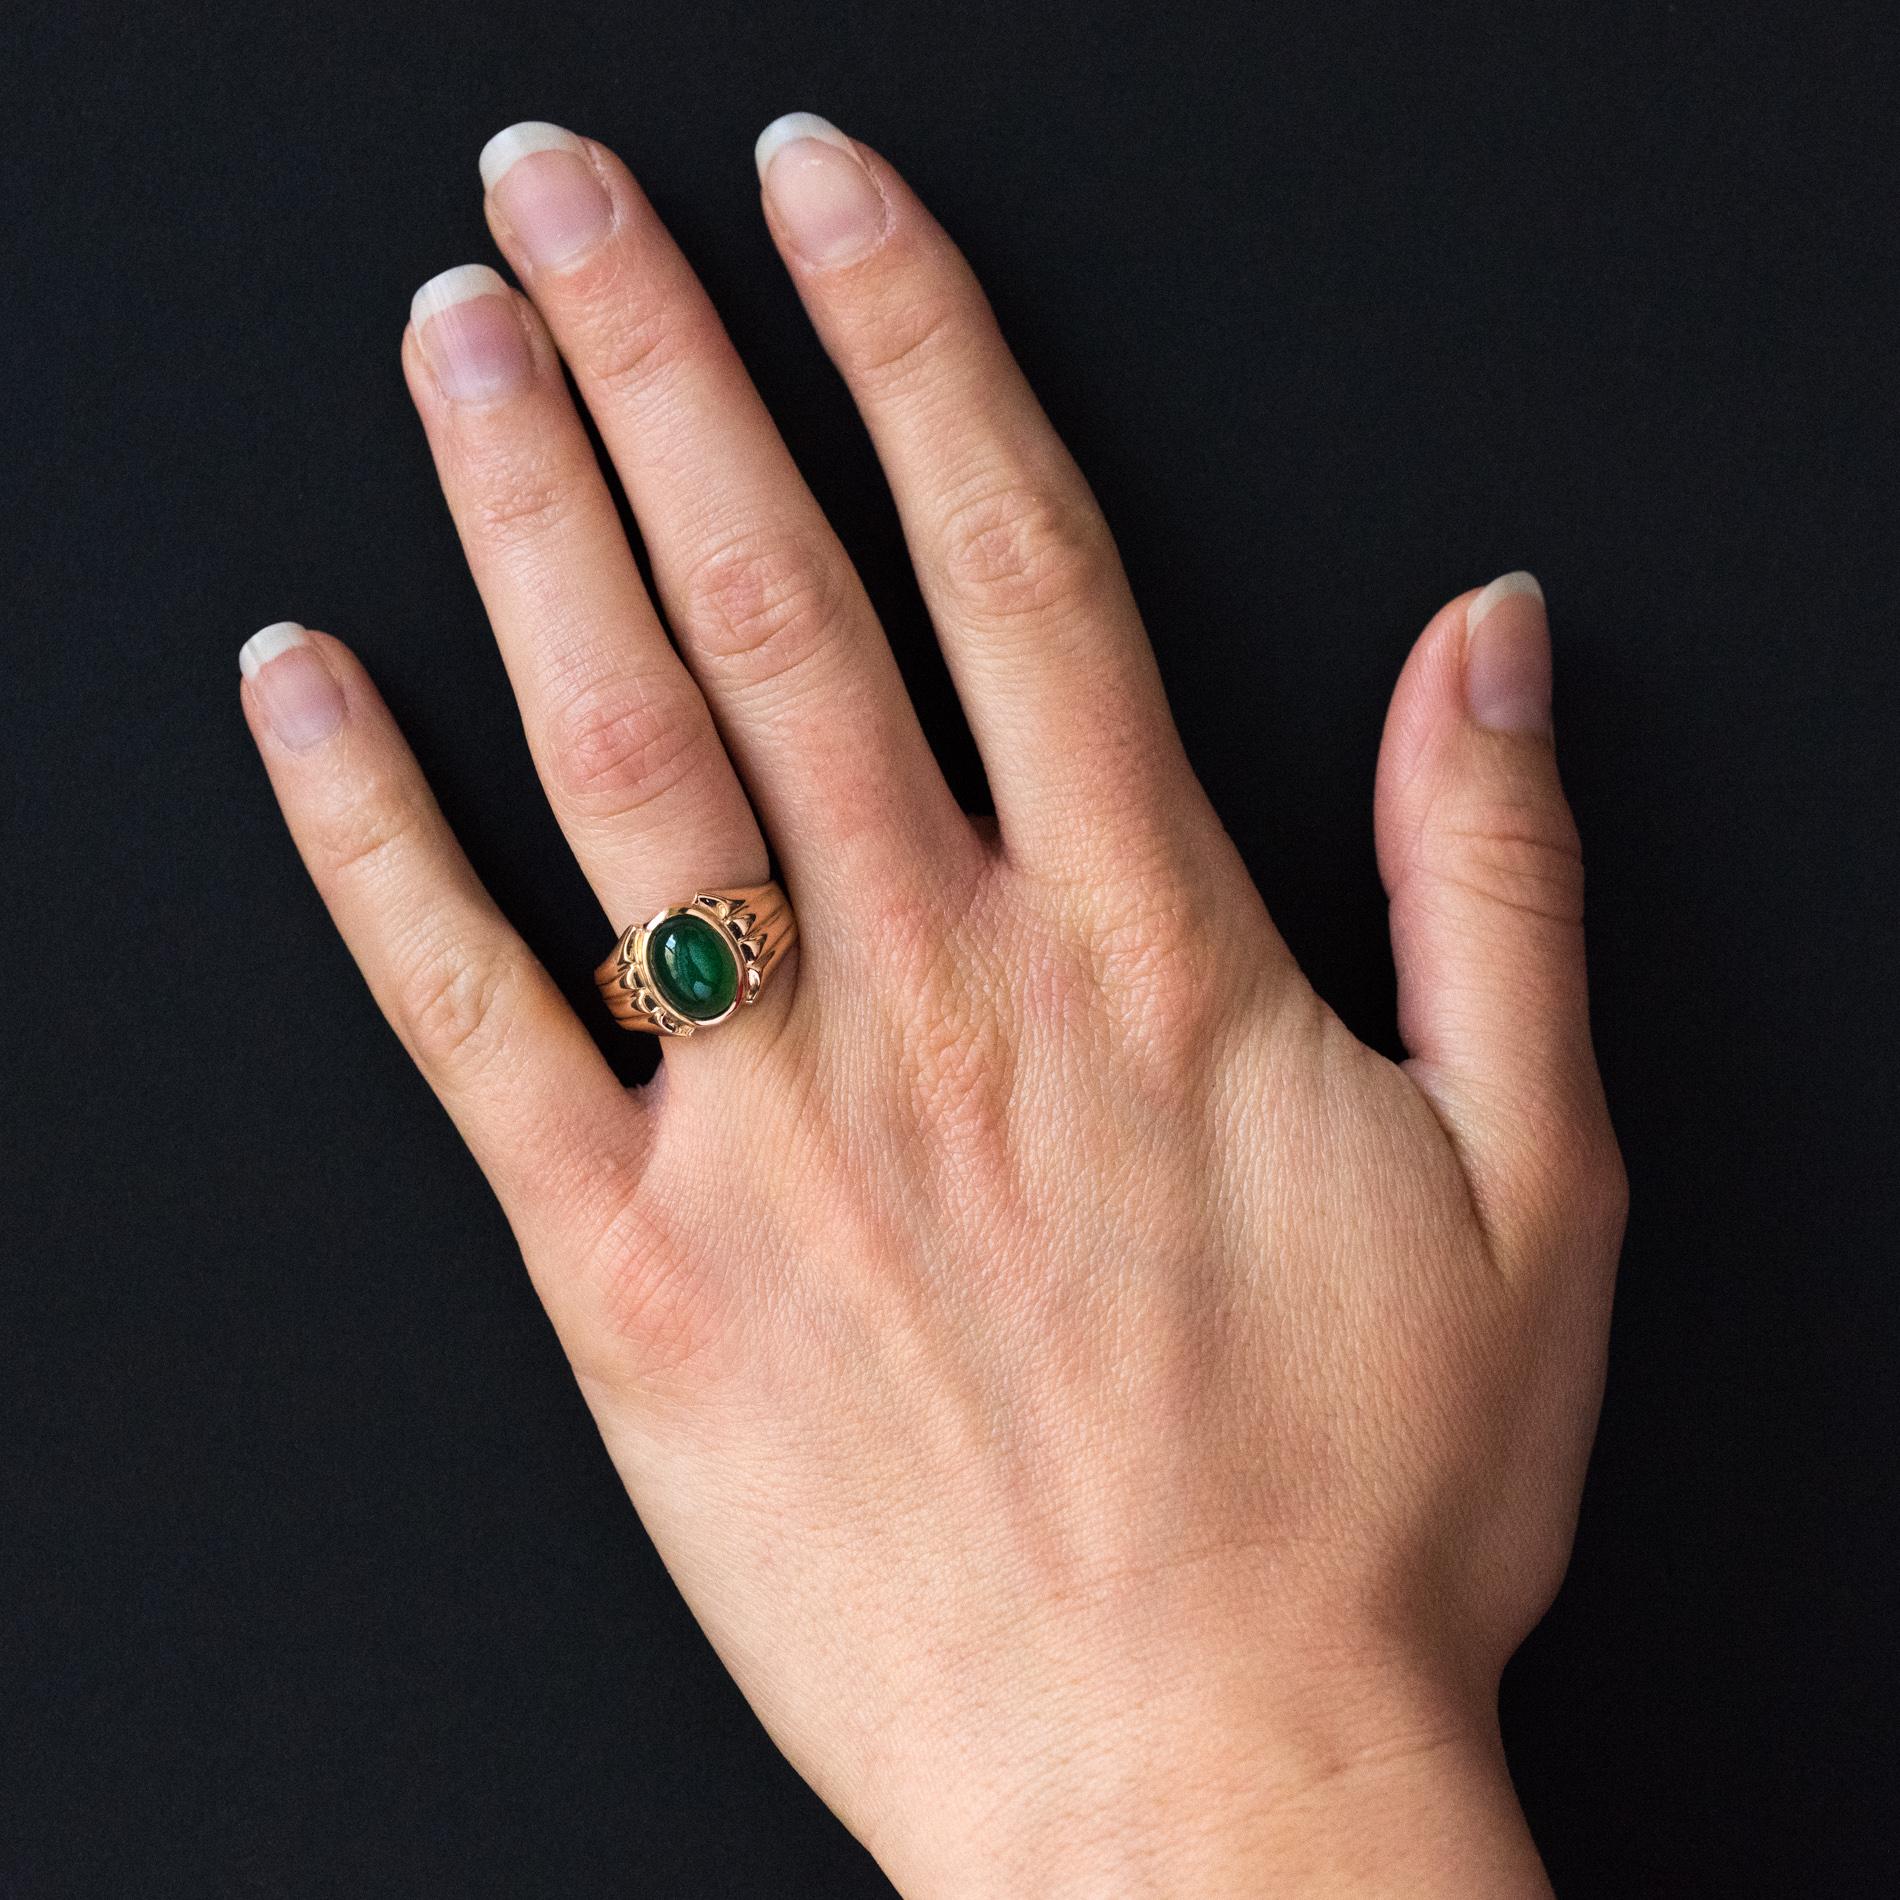 Ring in 18 karats yellow gold, eagle's head hallmark.
This beautiful lady's signet ring is set on its top of an oval cabochon Chrysoprase. On both sides, gadroons give the start of the ring.
Total weight of chysoprase: approximately 2.05